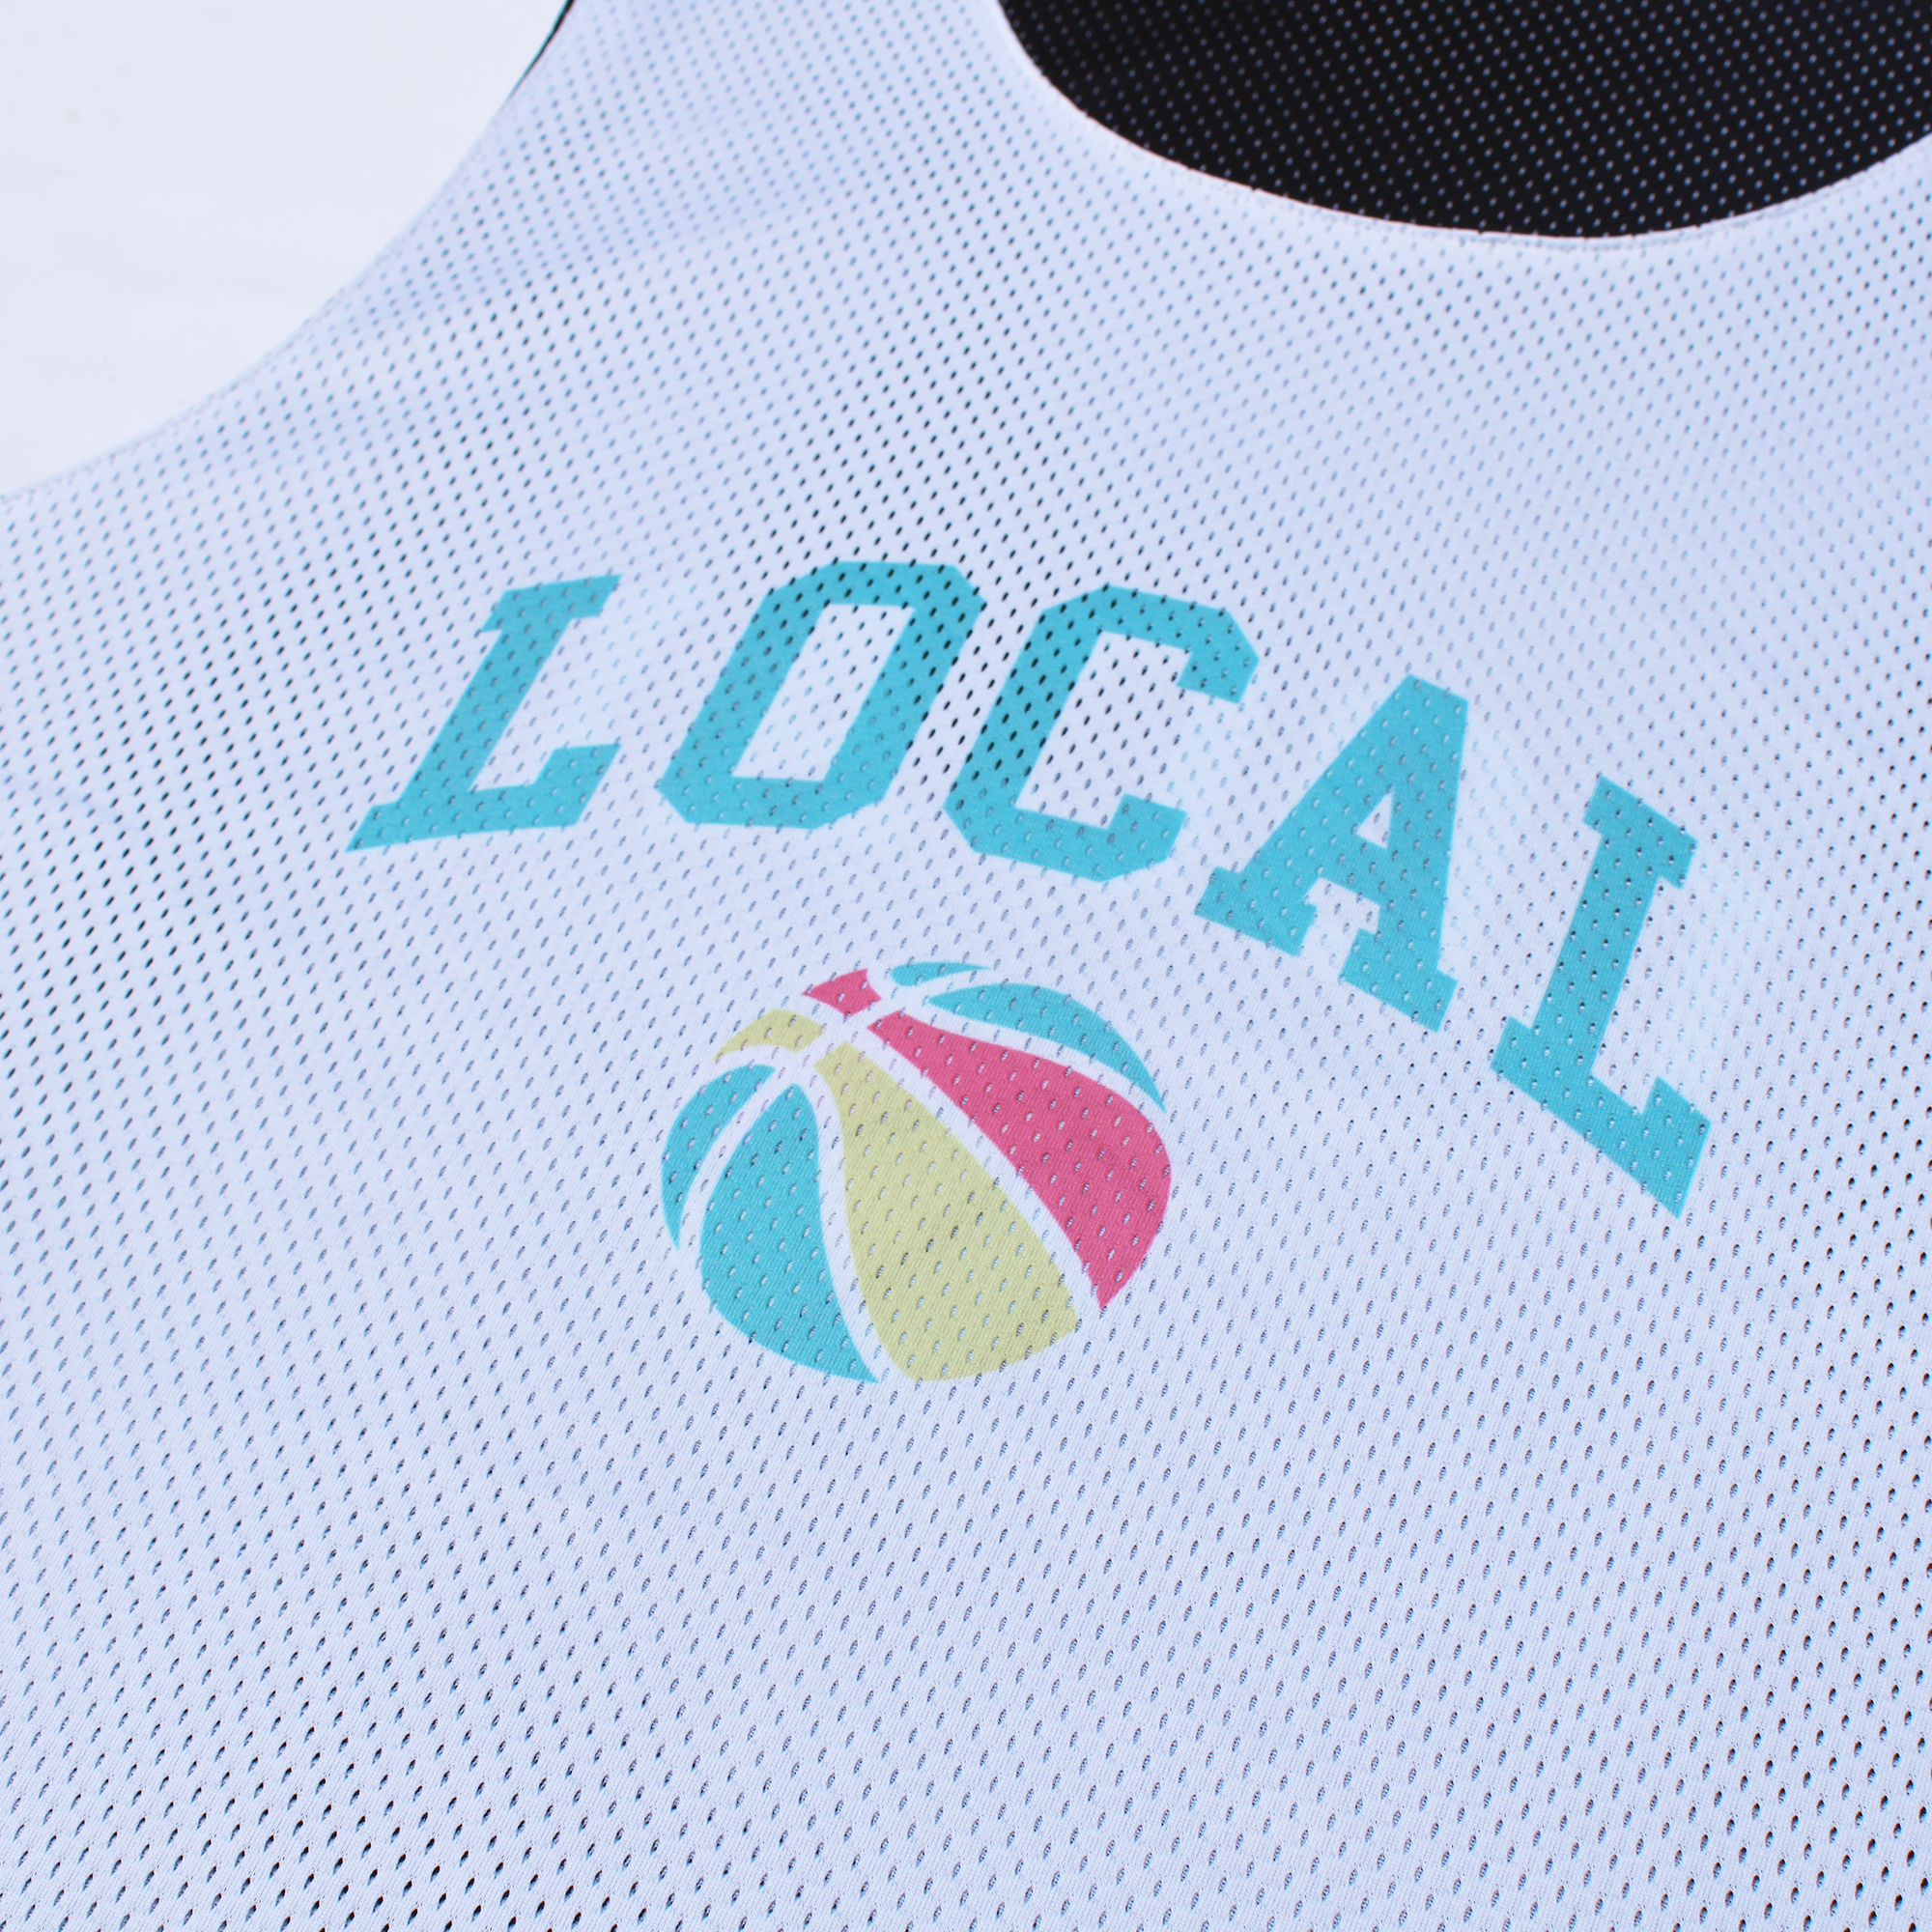 Local Hoops Tournament Jersey